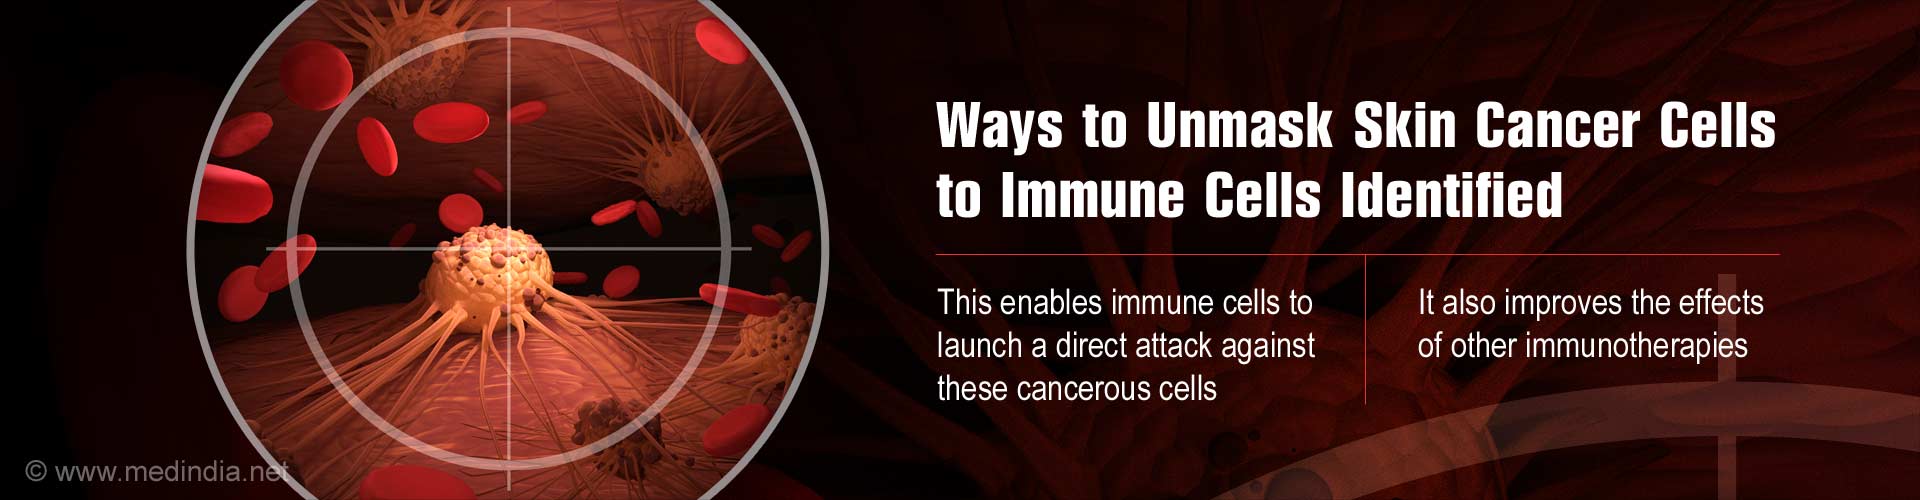 ways to unmask skin cancer cells to immune cells identified
- this enables immune cells to launch a direct attack against these cancerous cells
- it also improves the effects of other immunotherapies
